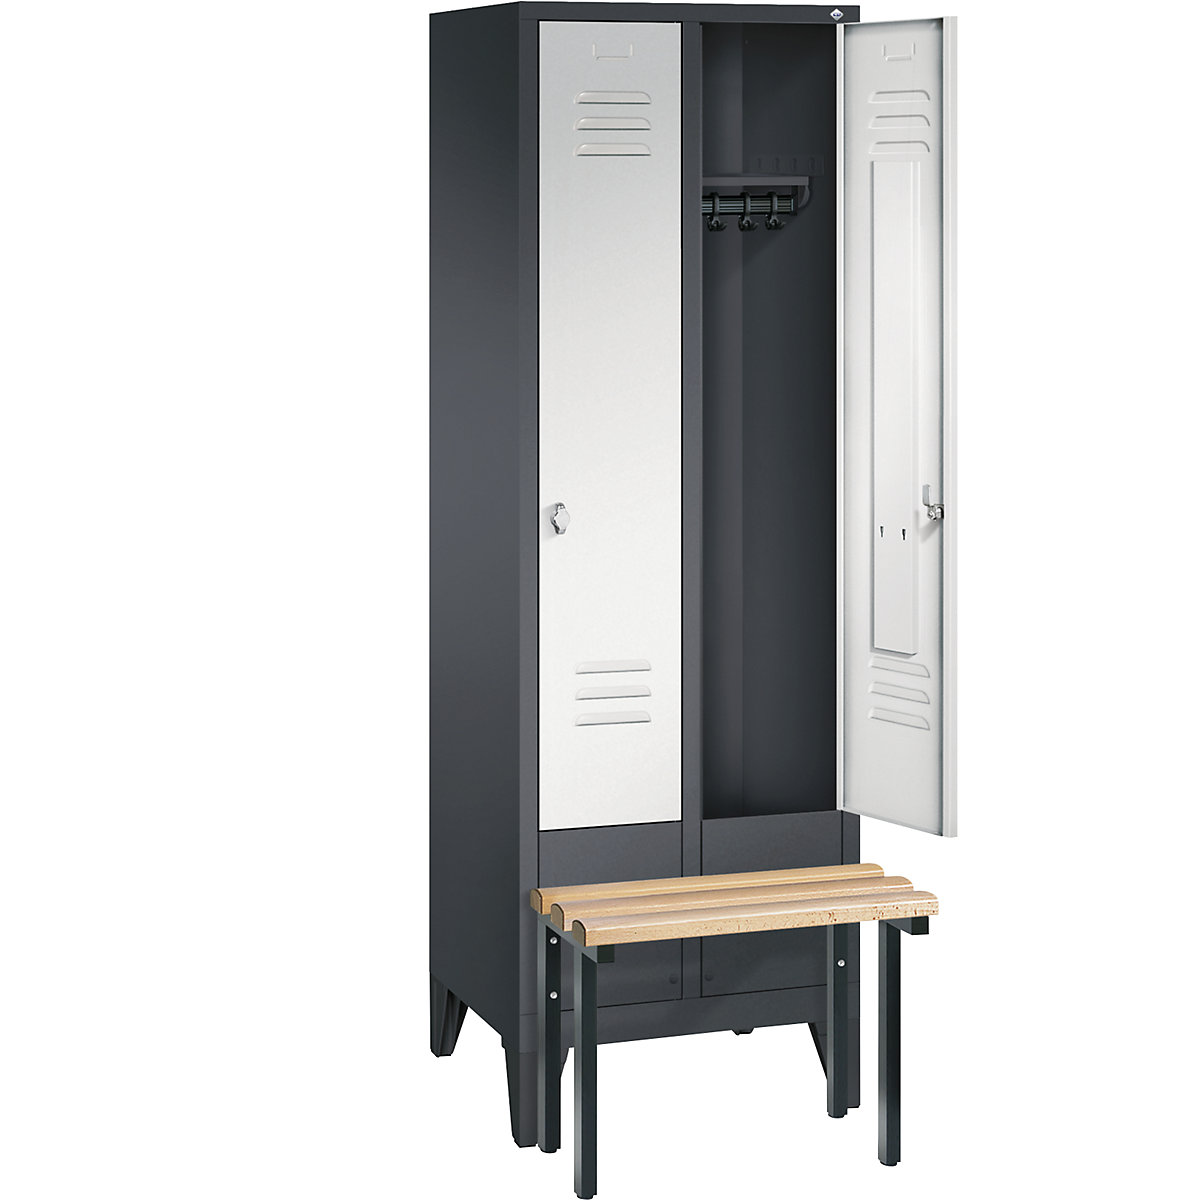 CLASSIC cloakroom locker with bench mounted in front – C+P (Product illustration 25)-24